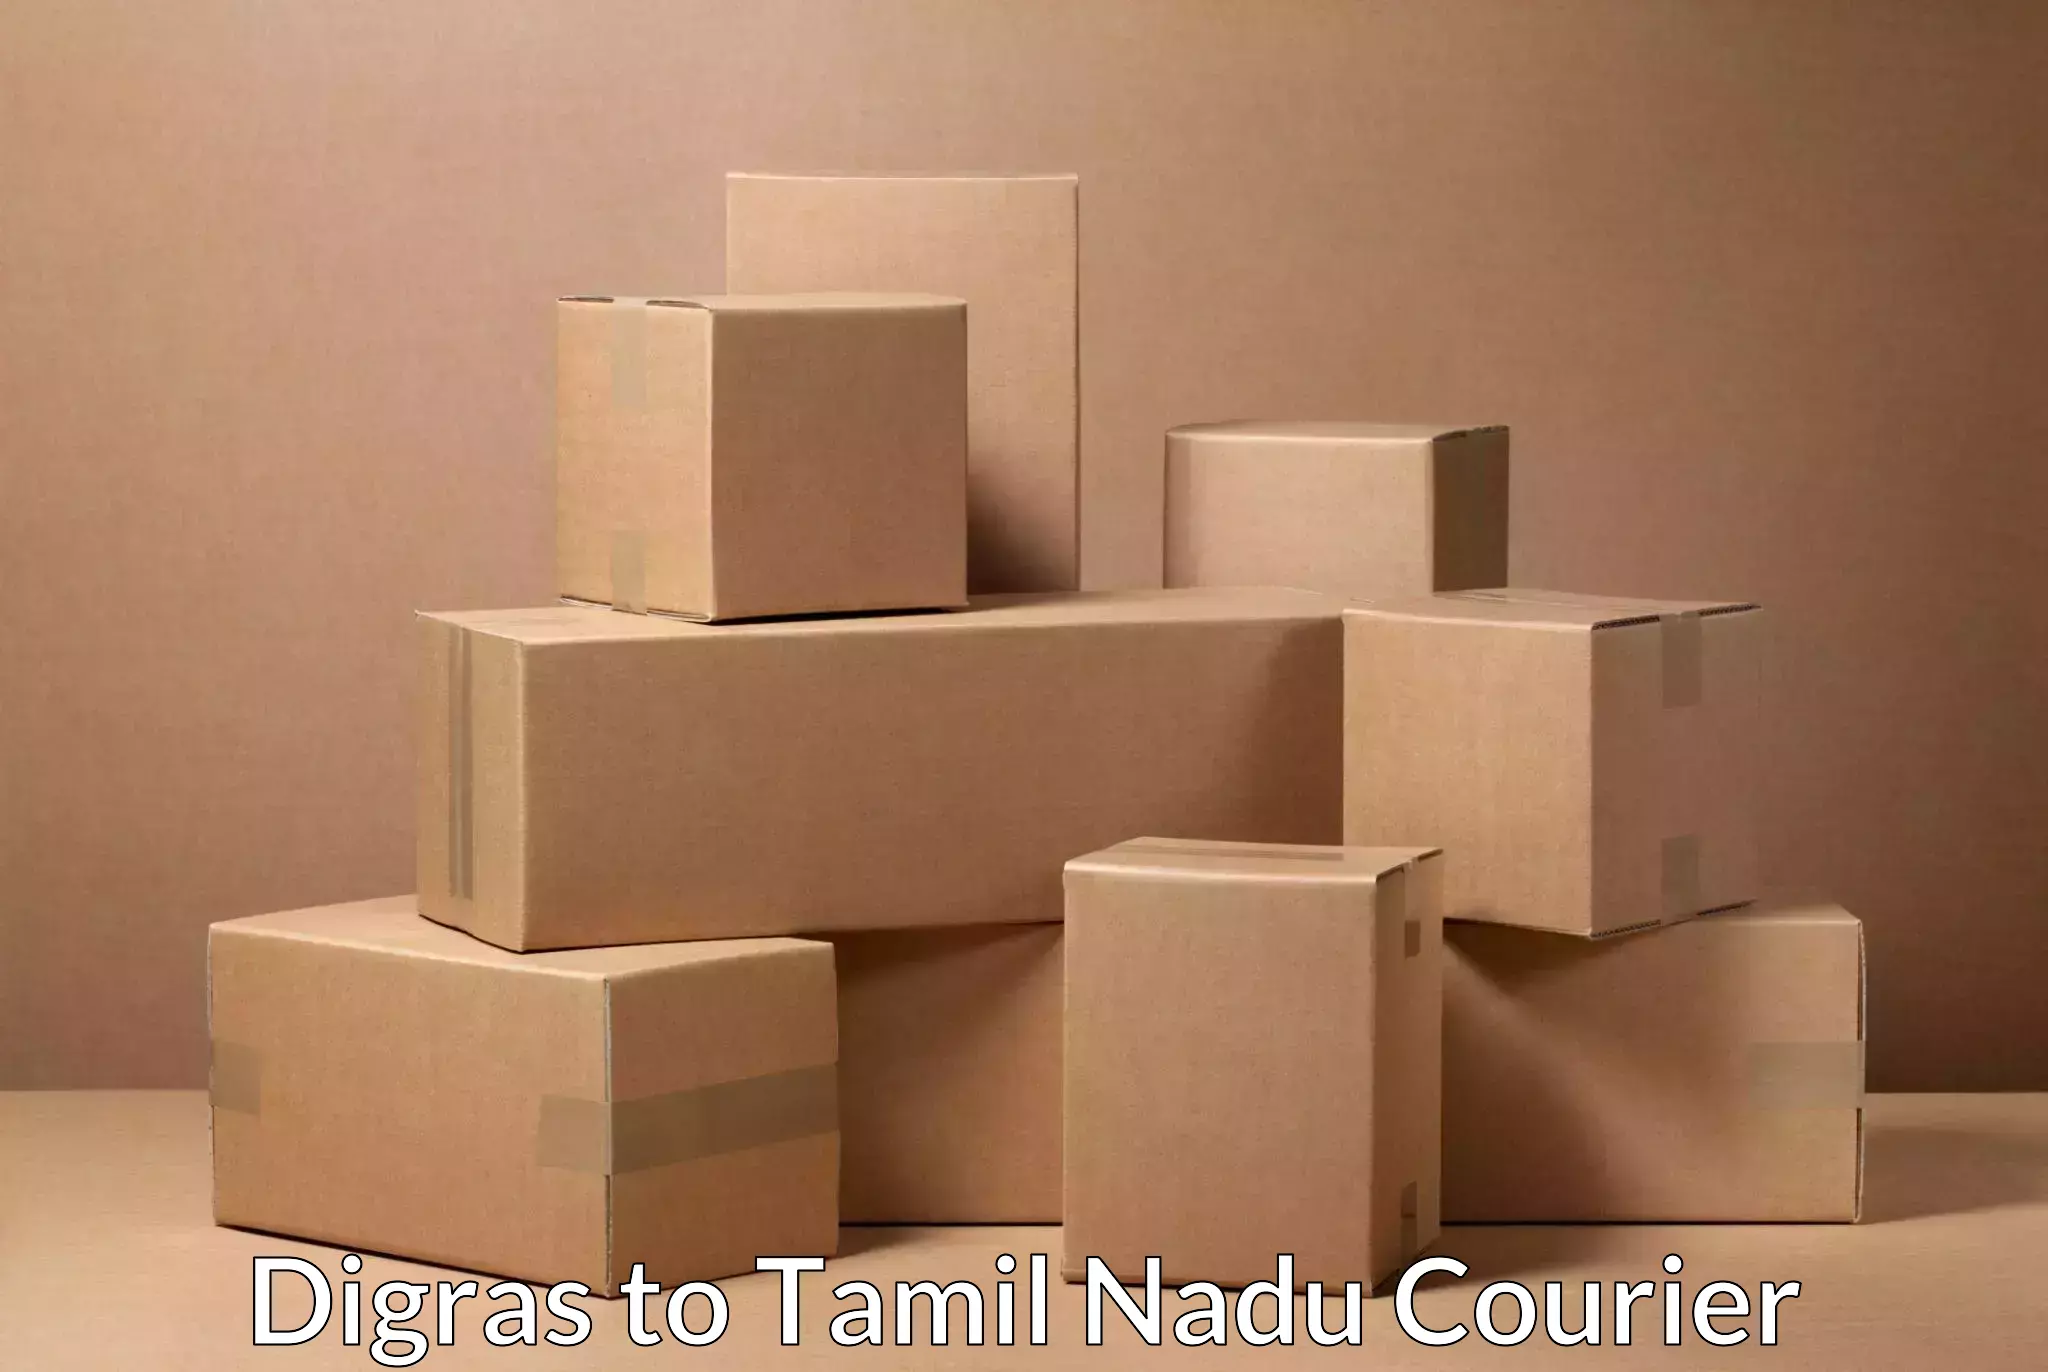 Automated shipping processes Digras to Tamil Nadu